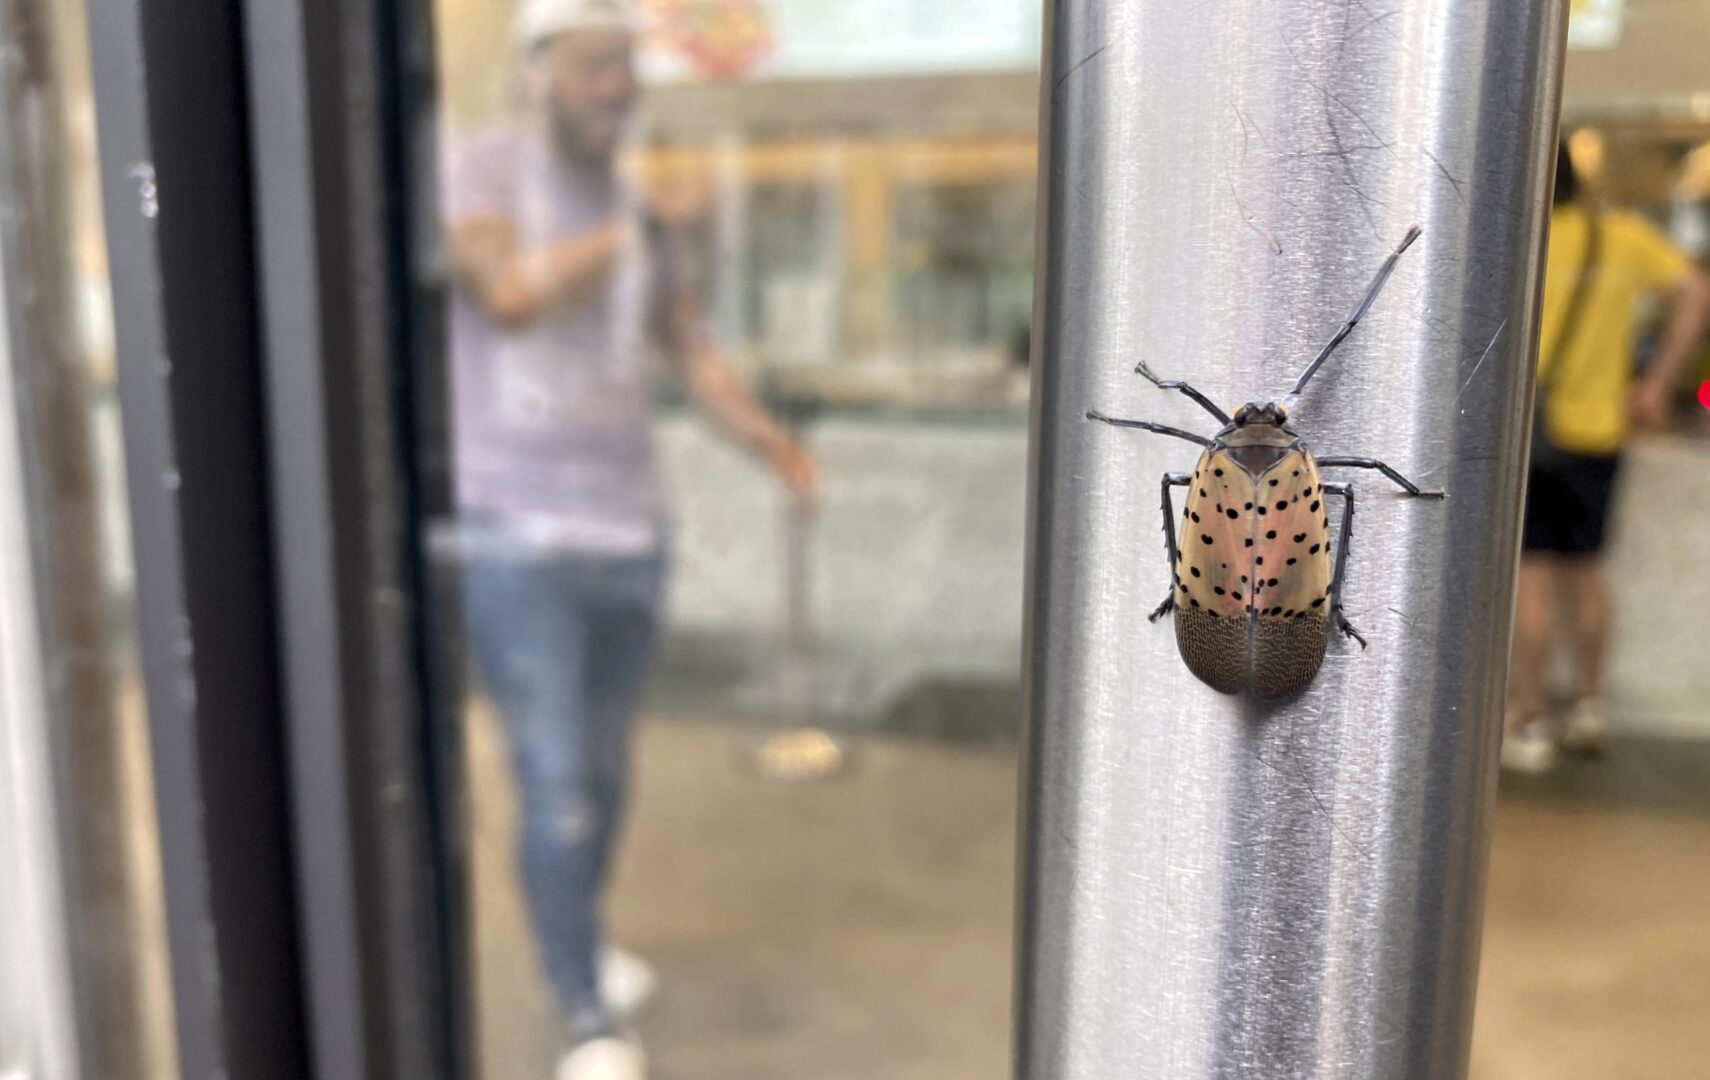 A spotted lanternfly is on a restaurant door handle in lower Manhattan in New York City on Tuesday, August 2, 2022.  